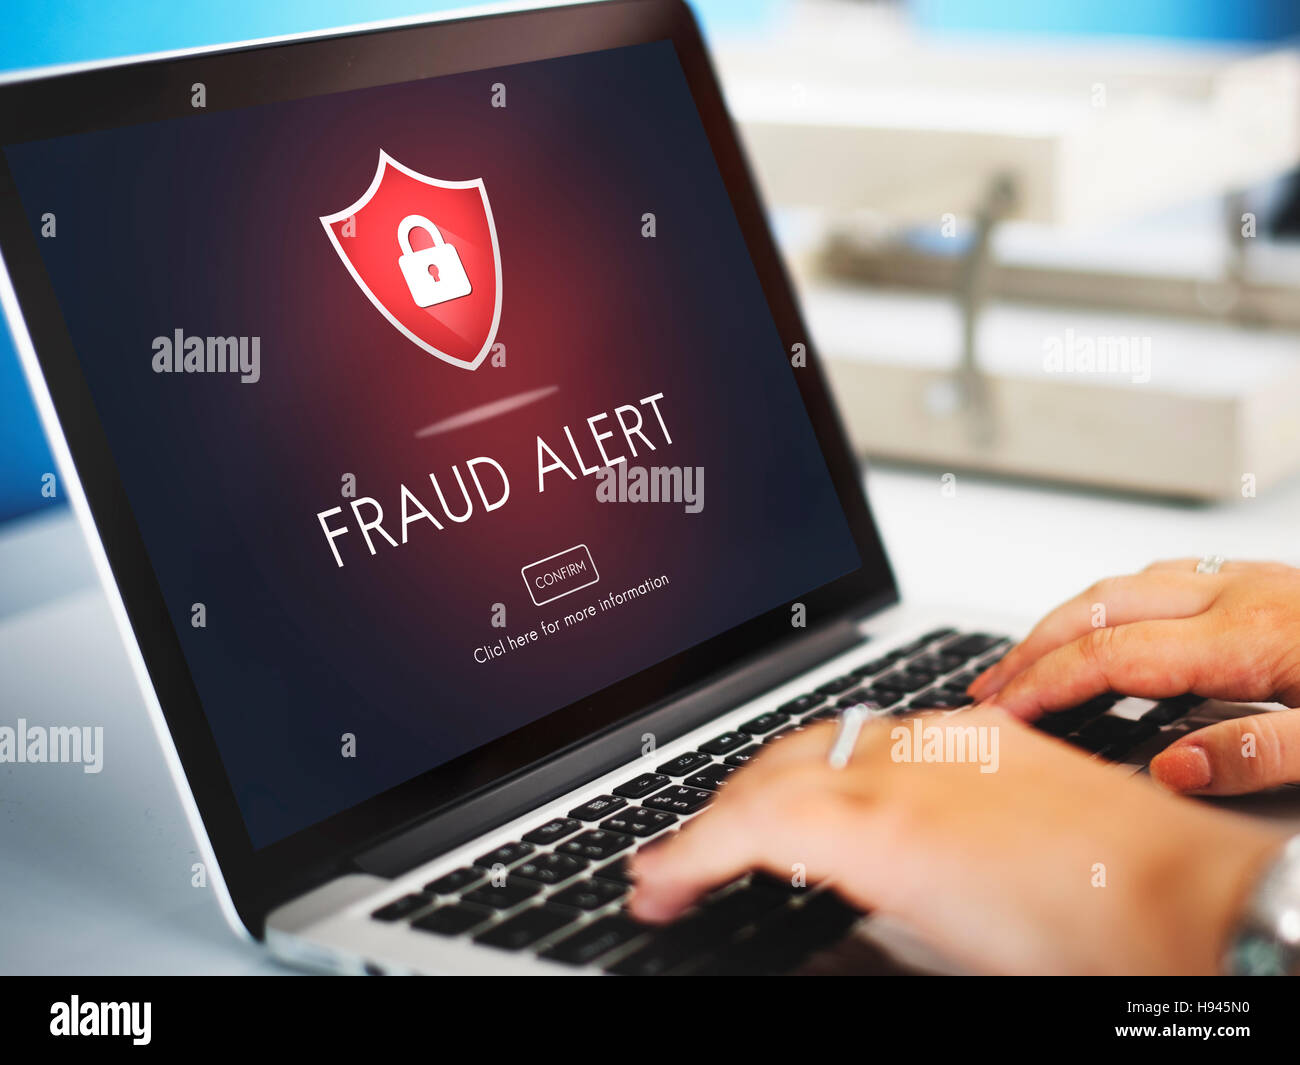 Fraud Alert Caution Defend Guard Notify Protect Concept Stock Photo